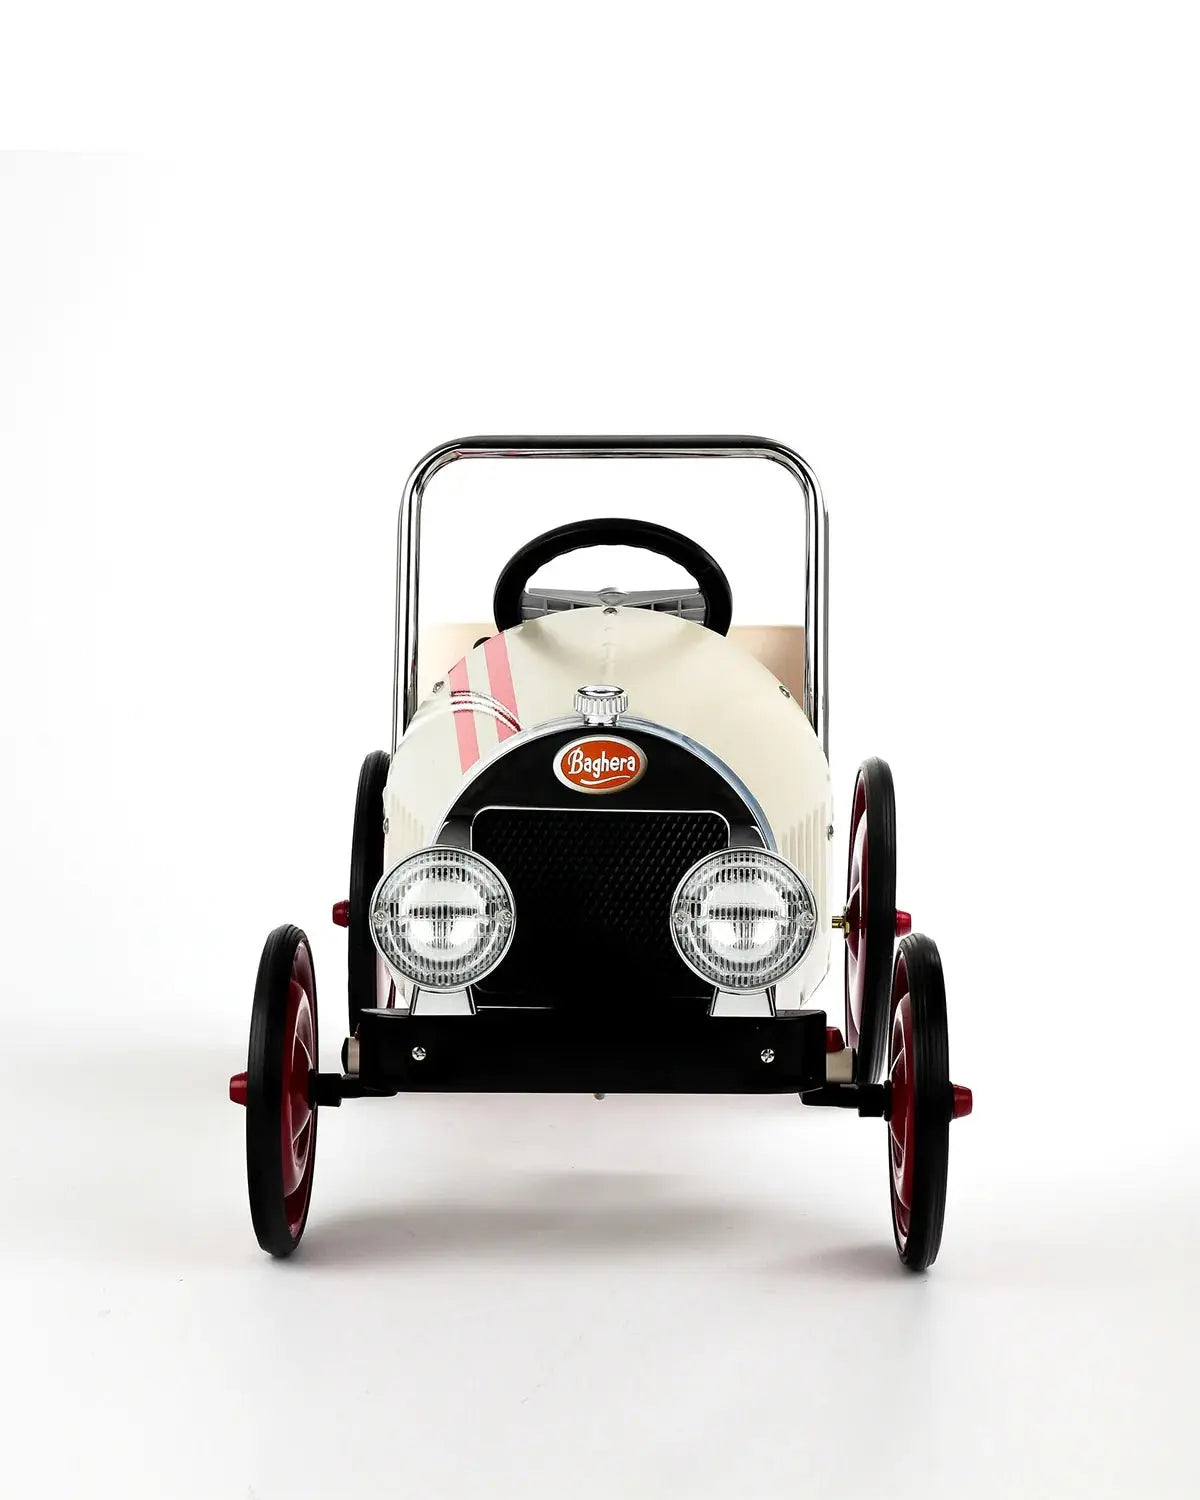 Classic Pedal Car for Kids, Adjustable Ride-on Toy, Durable Steel Construction, Retro Style  Baghera White  